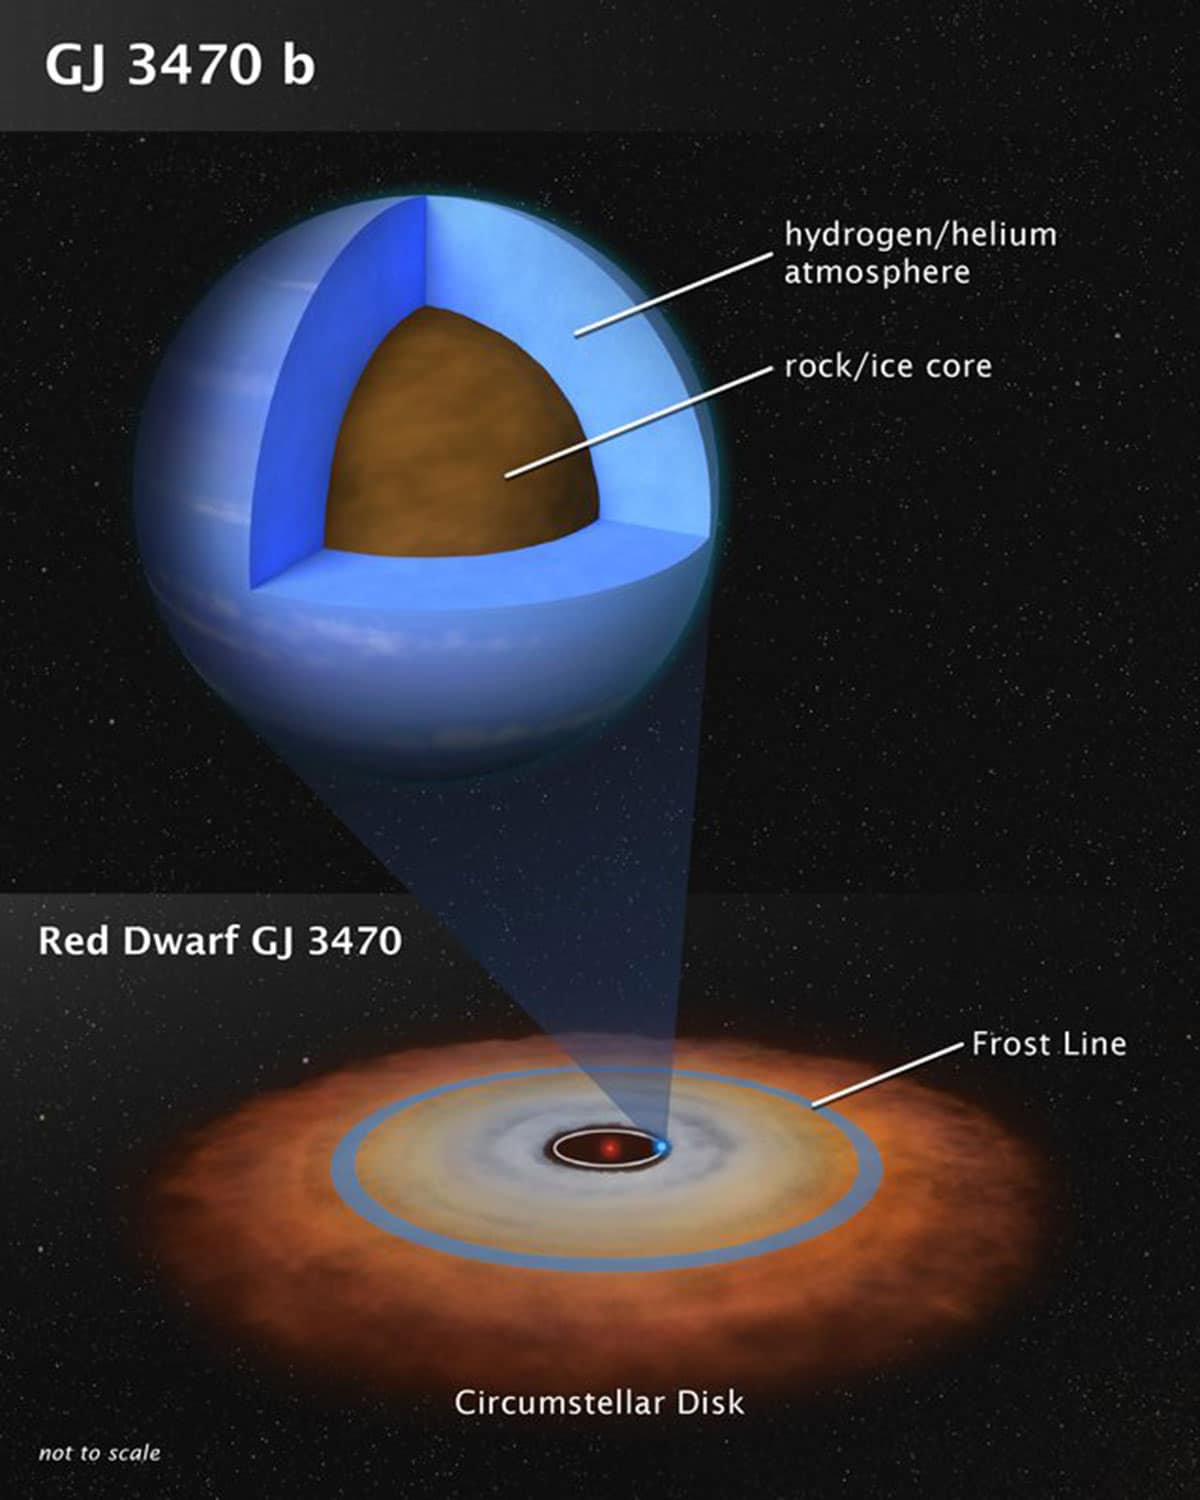 This artist's illustration shows the theoretical internal structure of the exoplanet GJ 3470 b. It is unlike any planet found in the Solar System. Weighing in at 12.6 Earth masses the planet is more massive than Earth but less massive than Neptune. Unlike Neptune, which is 3 billion miles from the Sun, GJ 3470 b may have formed very close to its red dwarf star as a dry, rocky object. It then gravitationally pulled in hydrogen and helium gas from a circumstellar disk to build up a thick atmosphere. The disk dissipated many billions of years ago, and the planet stopped growing. The bottom illustration shows the disk as the system may have looked long ago. Observations by NASA's Hubble and Spitzer space telescopes have chemically analyzed the composition of GJ 3470 b's very clear and deep atmosphere, yielding clues to the planet's origin. Many planets of this mass exist in our galaxy. Credit: NASA, ESA, and L. Hustak